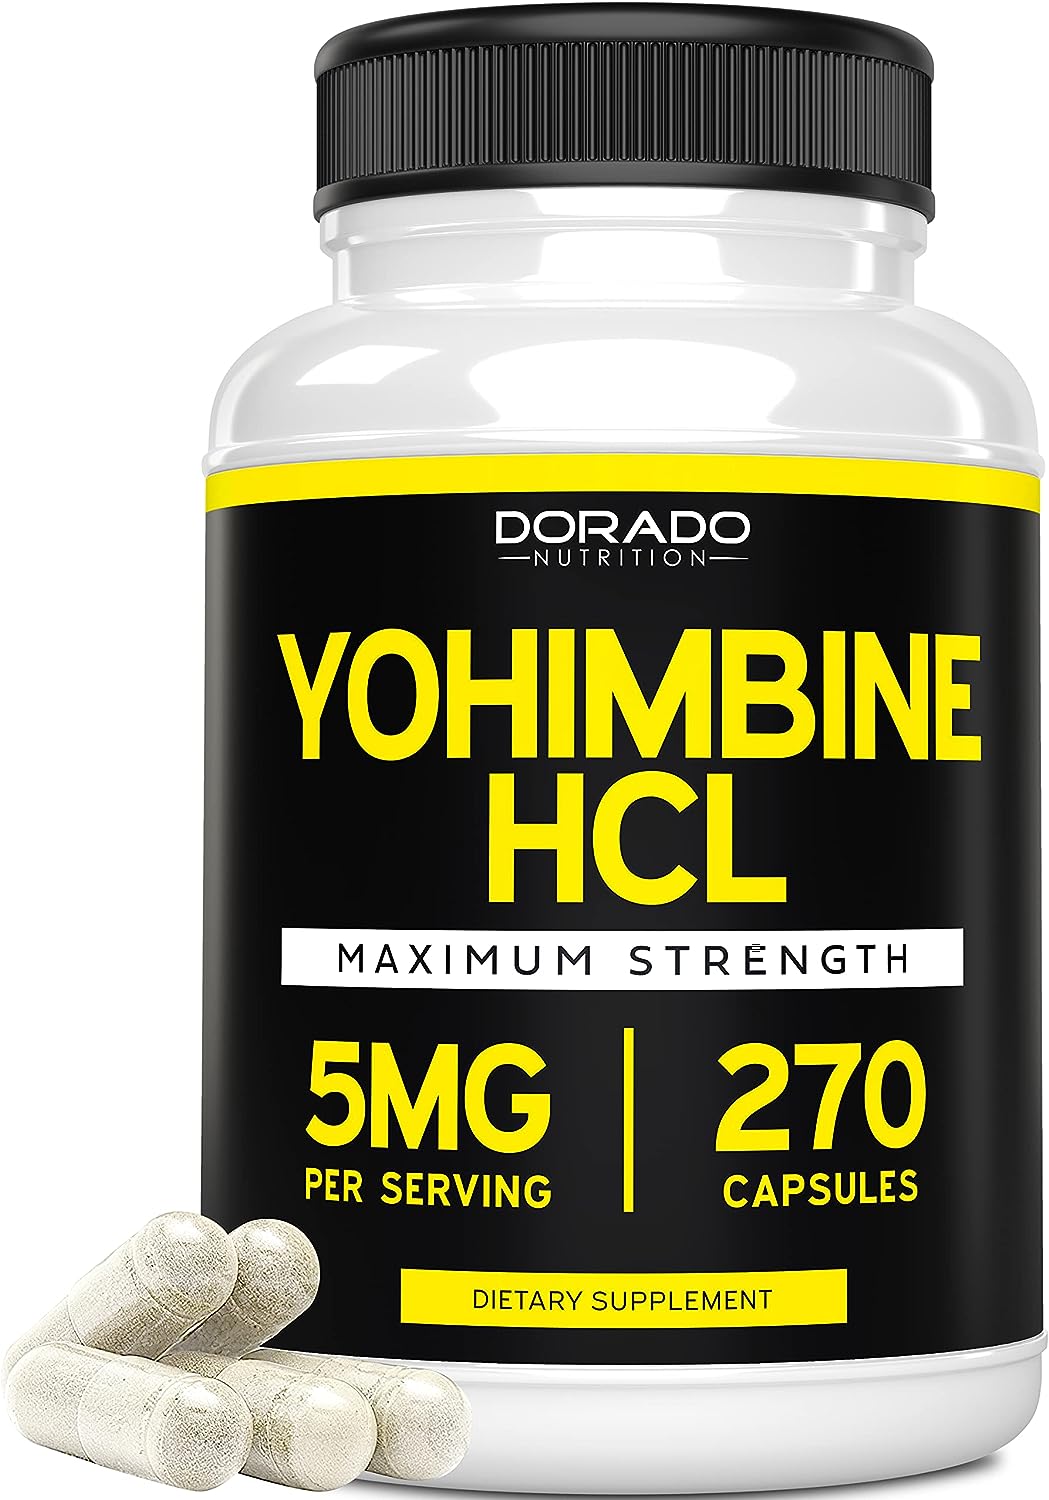 Yohimbine Hcl 5mg For Men And Women Yohimbe Extract Extra Strength Supplement 270 2160